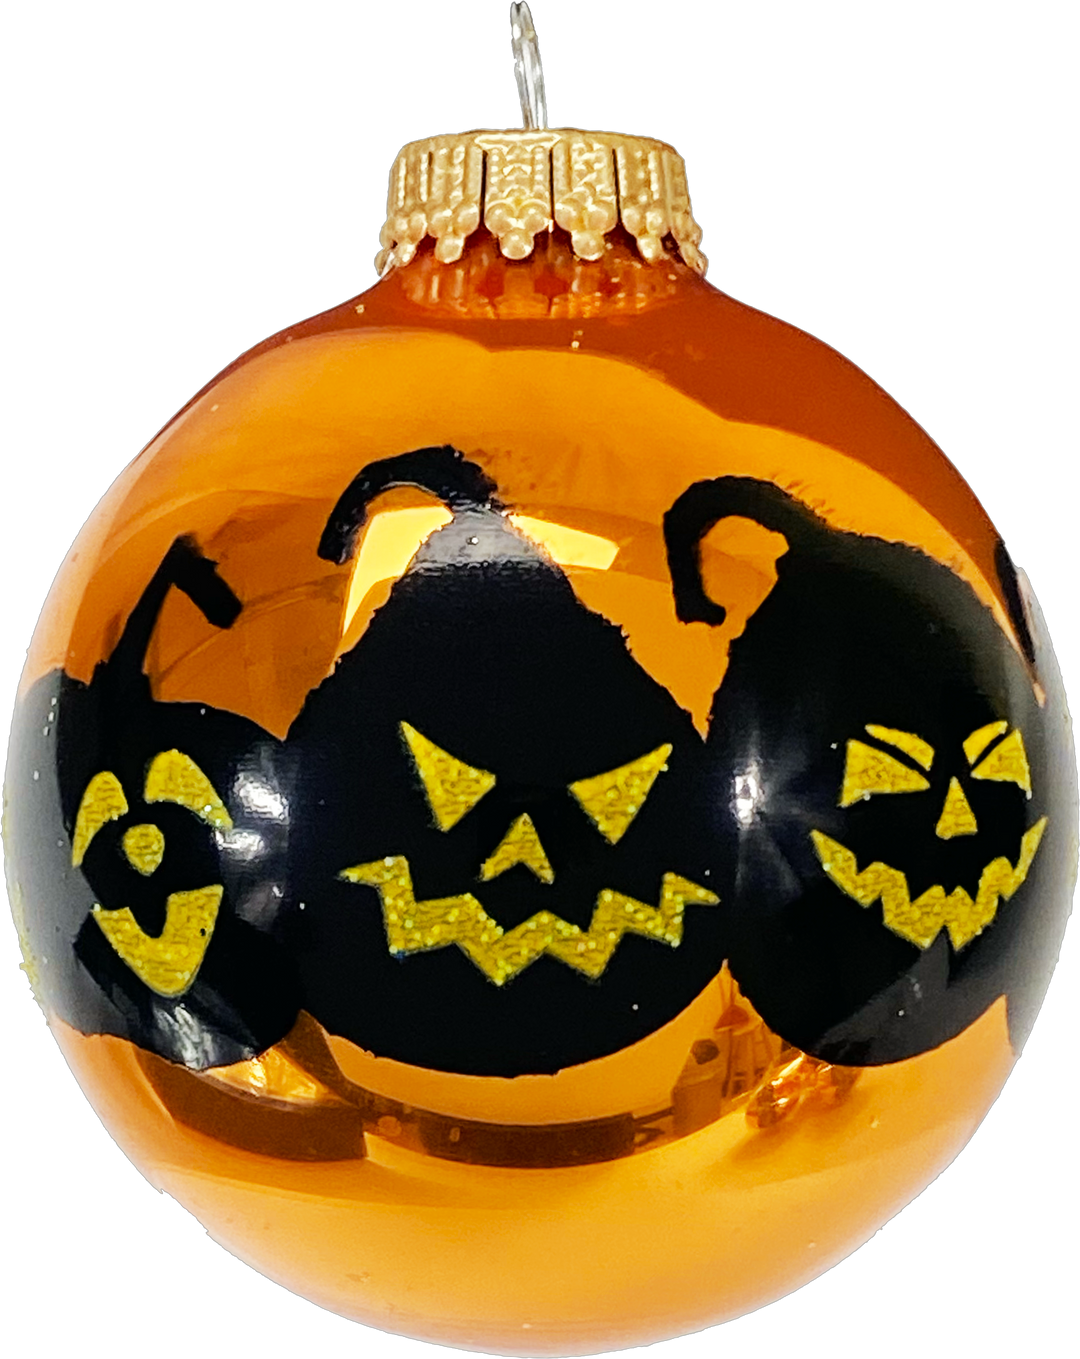 2 5/8" (67mm) Halloween Ball Ornaments Solid Orange Crush with Jack-O-Lanterns 4/Box, 12/Case, 48 Pieces